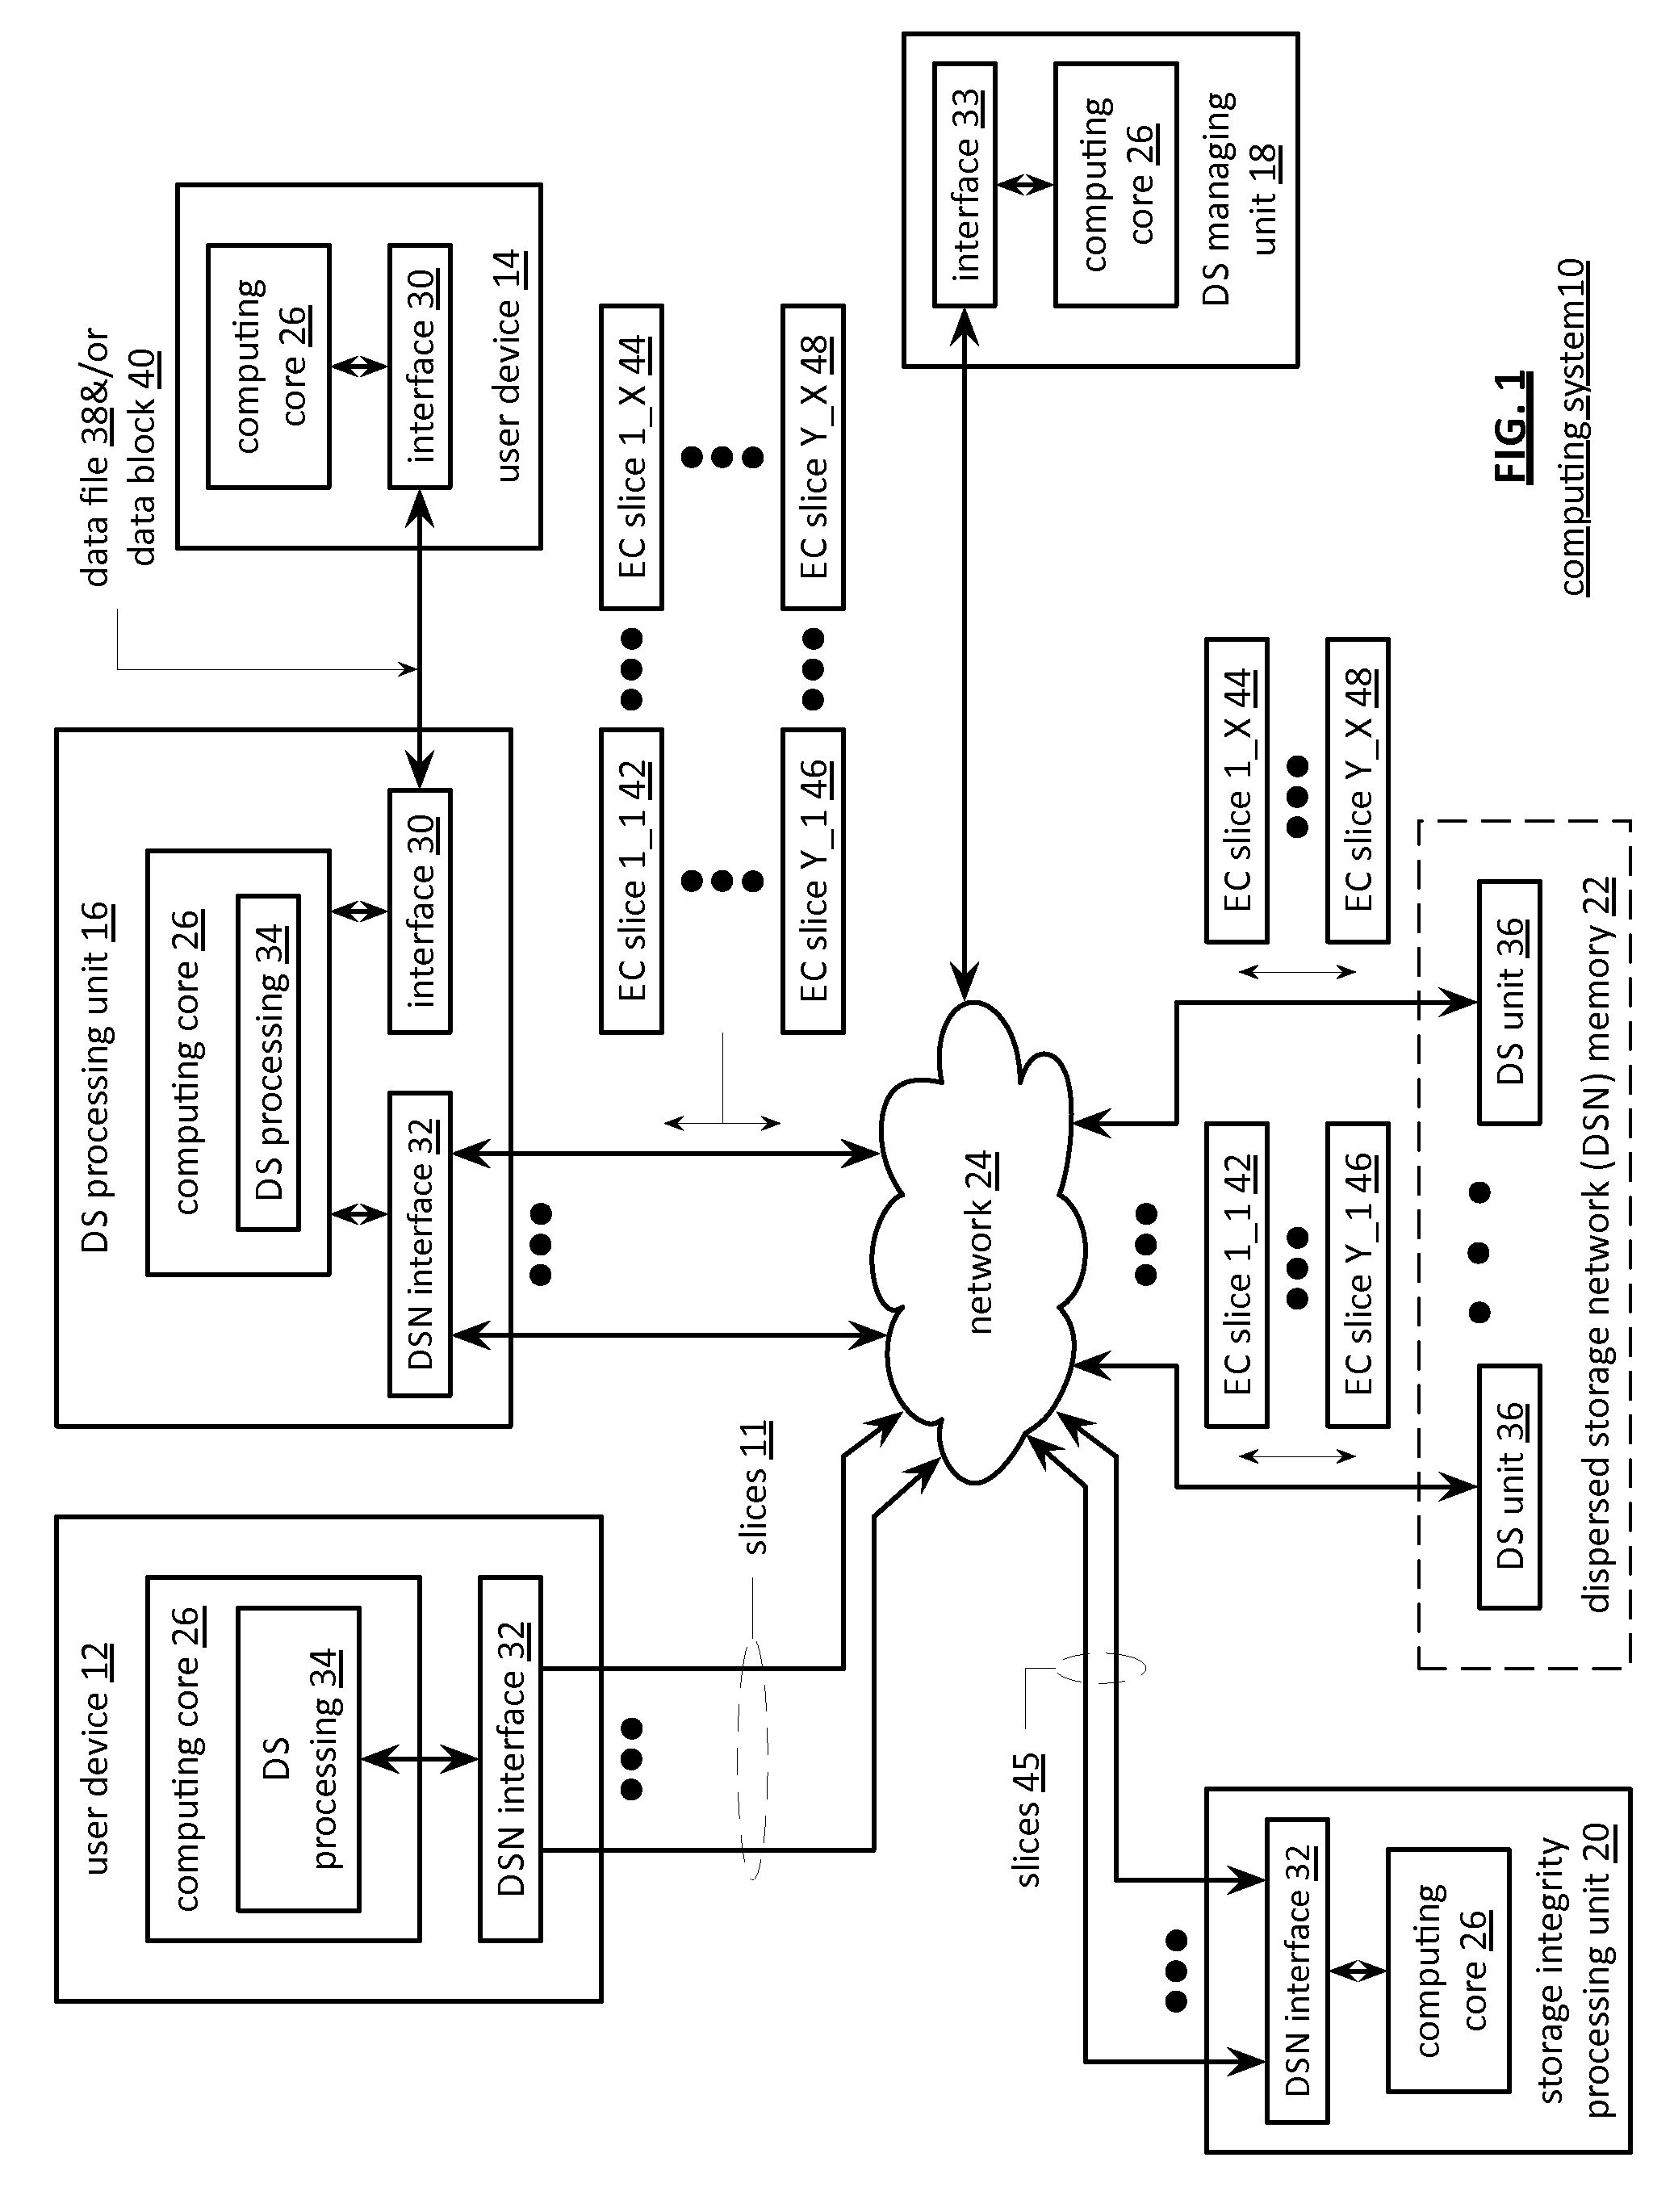 Prioritized deleting of slices stored in a dispersed storage network